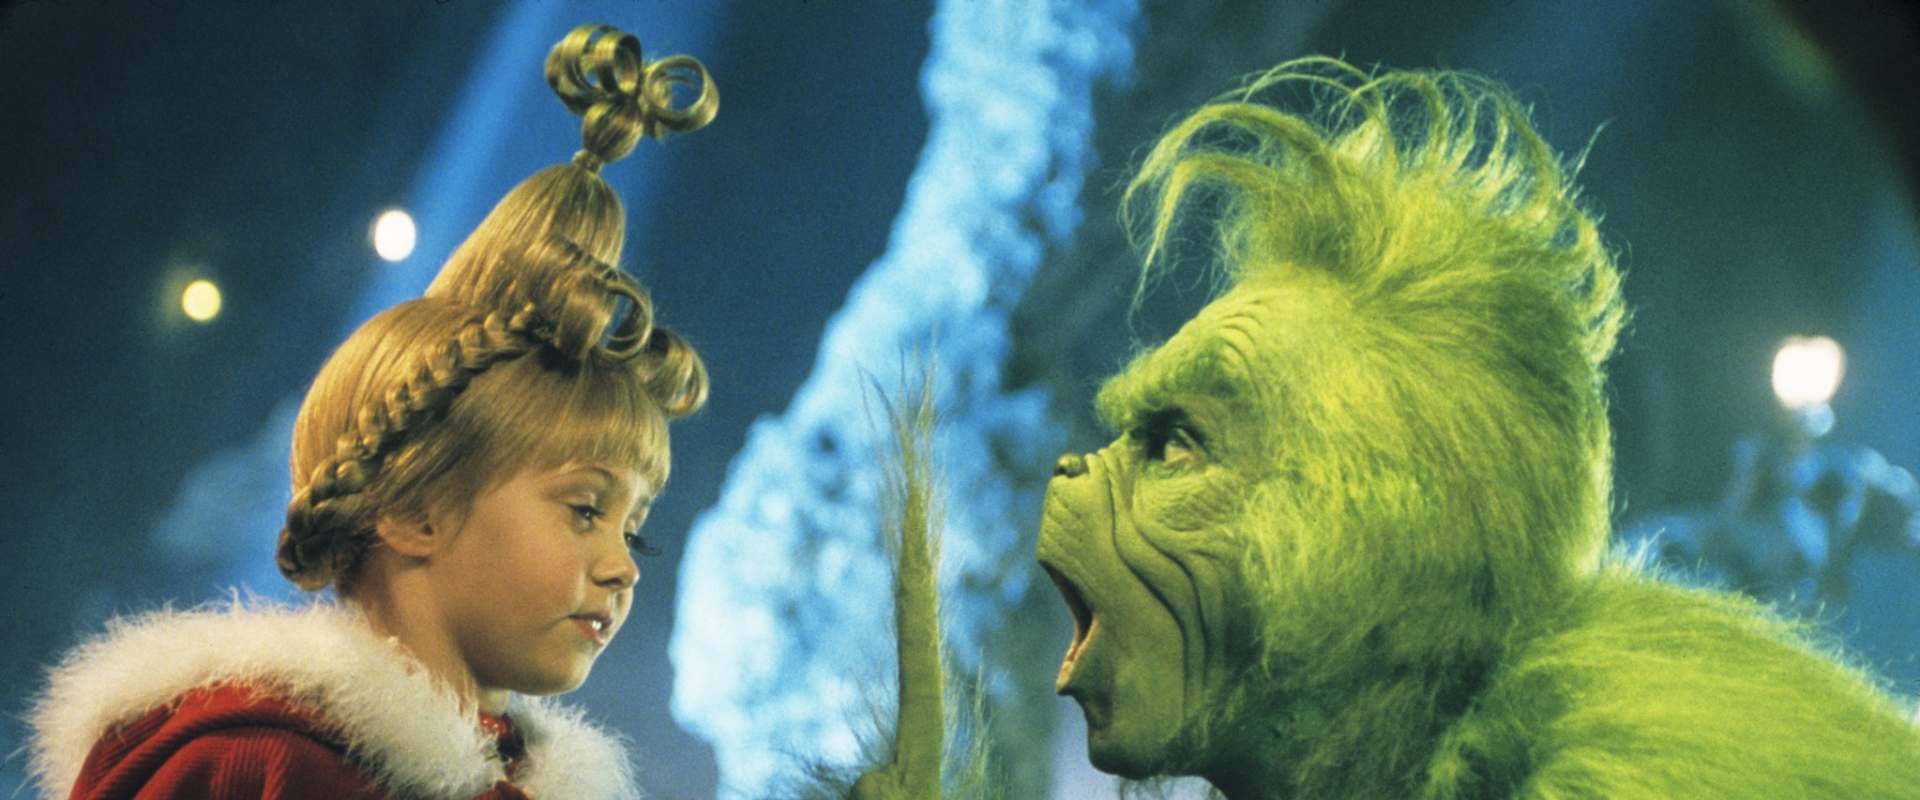 How the Grinch Stole Christmas background 1